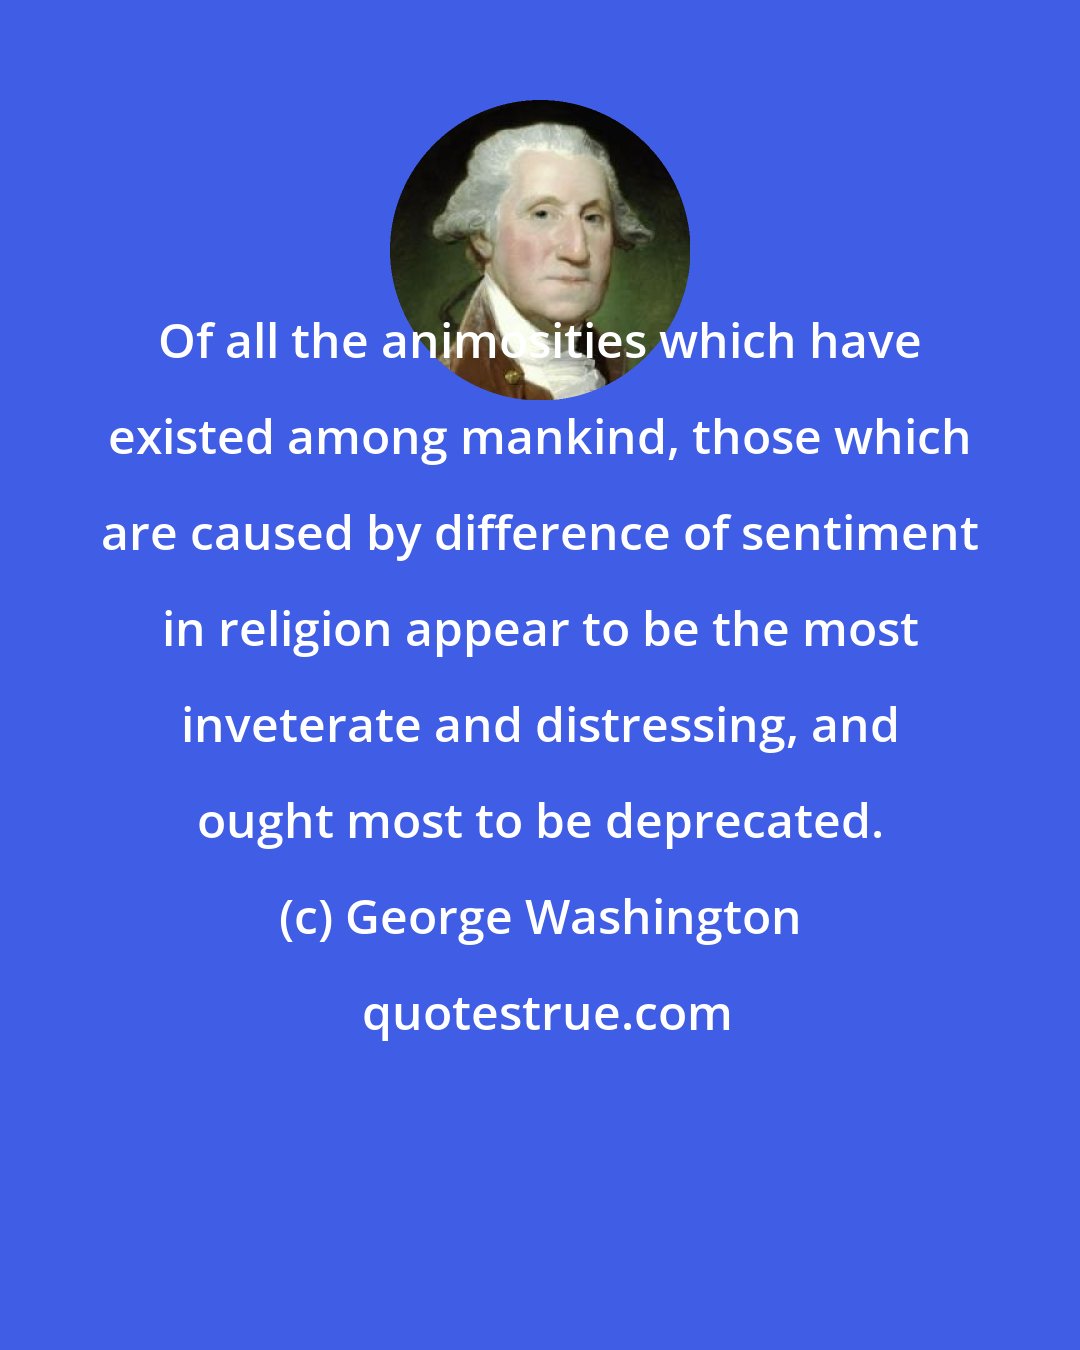 George Washington: Of all the animosities which have existed among mankind, those which are caused by difference of sentiment in religion appear to be the most inveterate and distressing, and ought most to be deprecated.